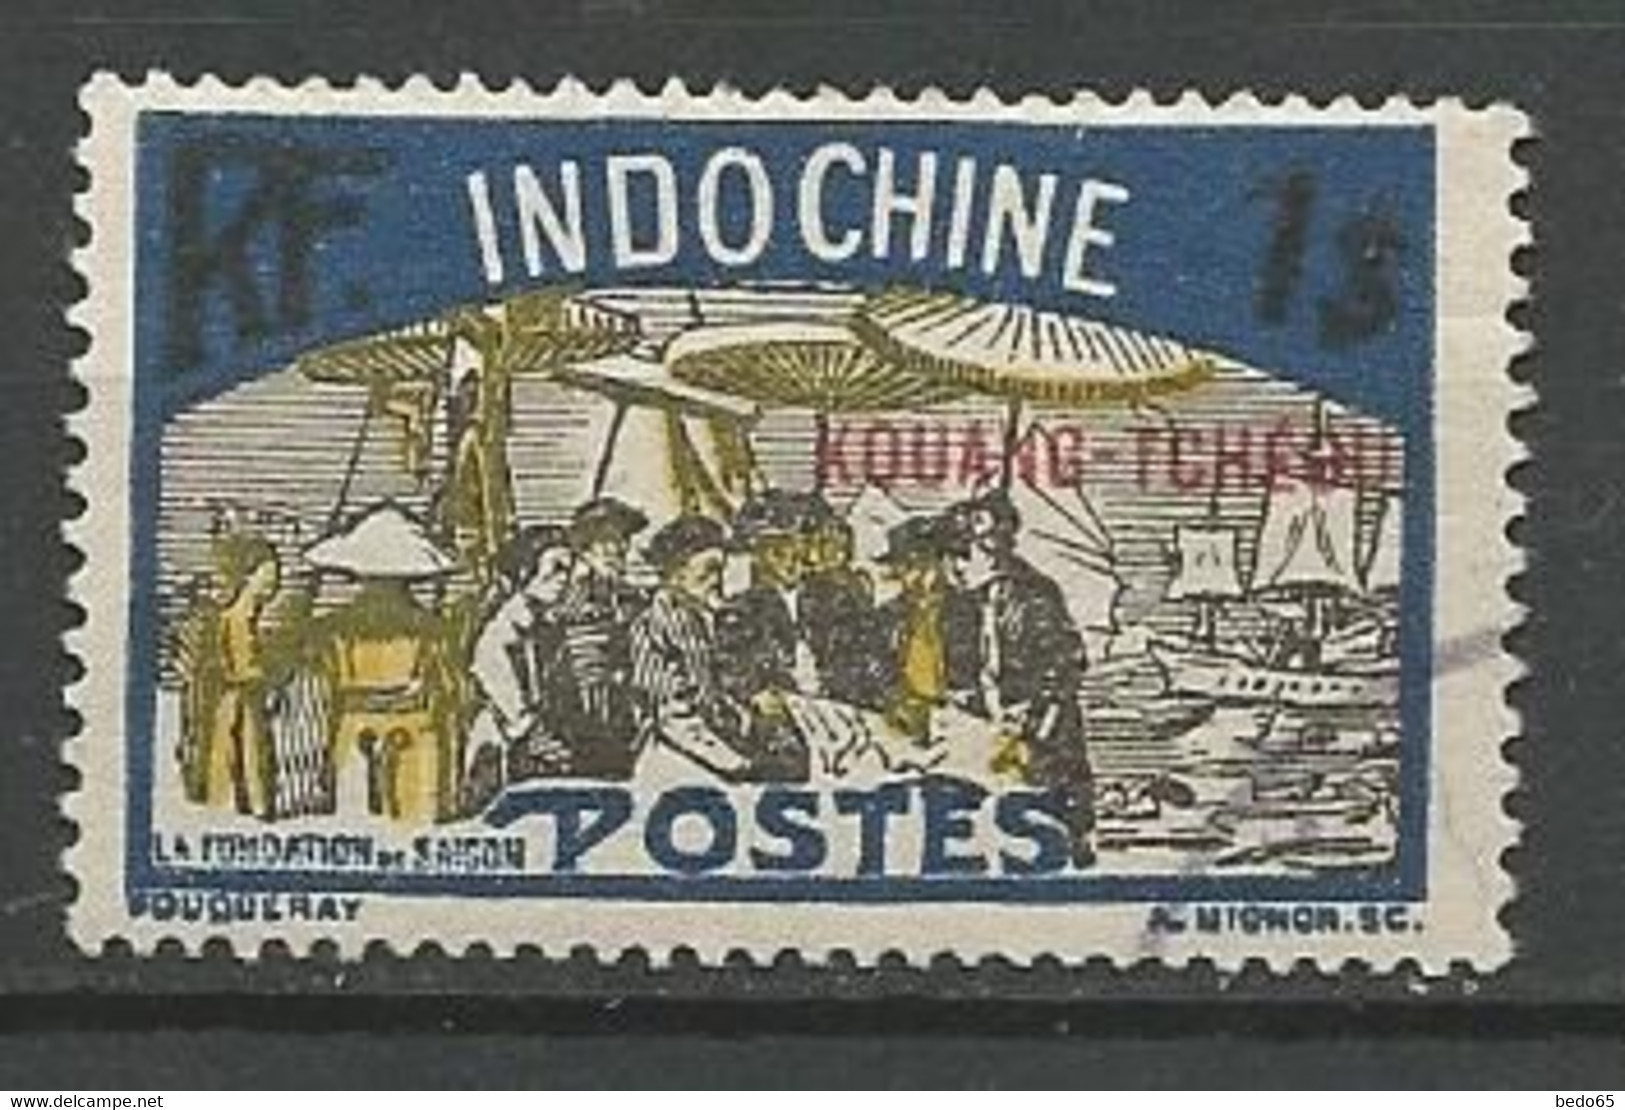 KOUANG-TCHEOU N° 95 OBL - Used Stamps